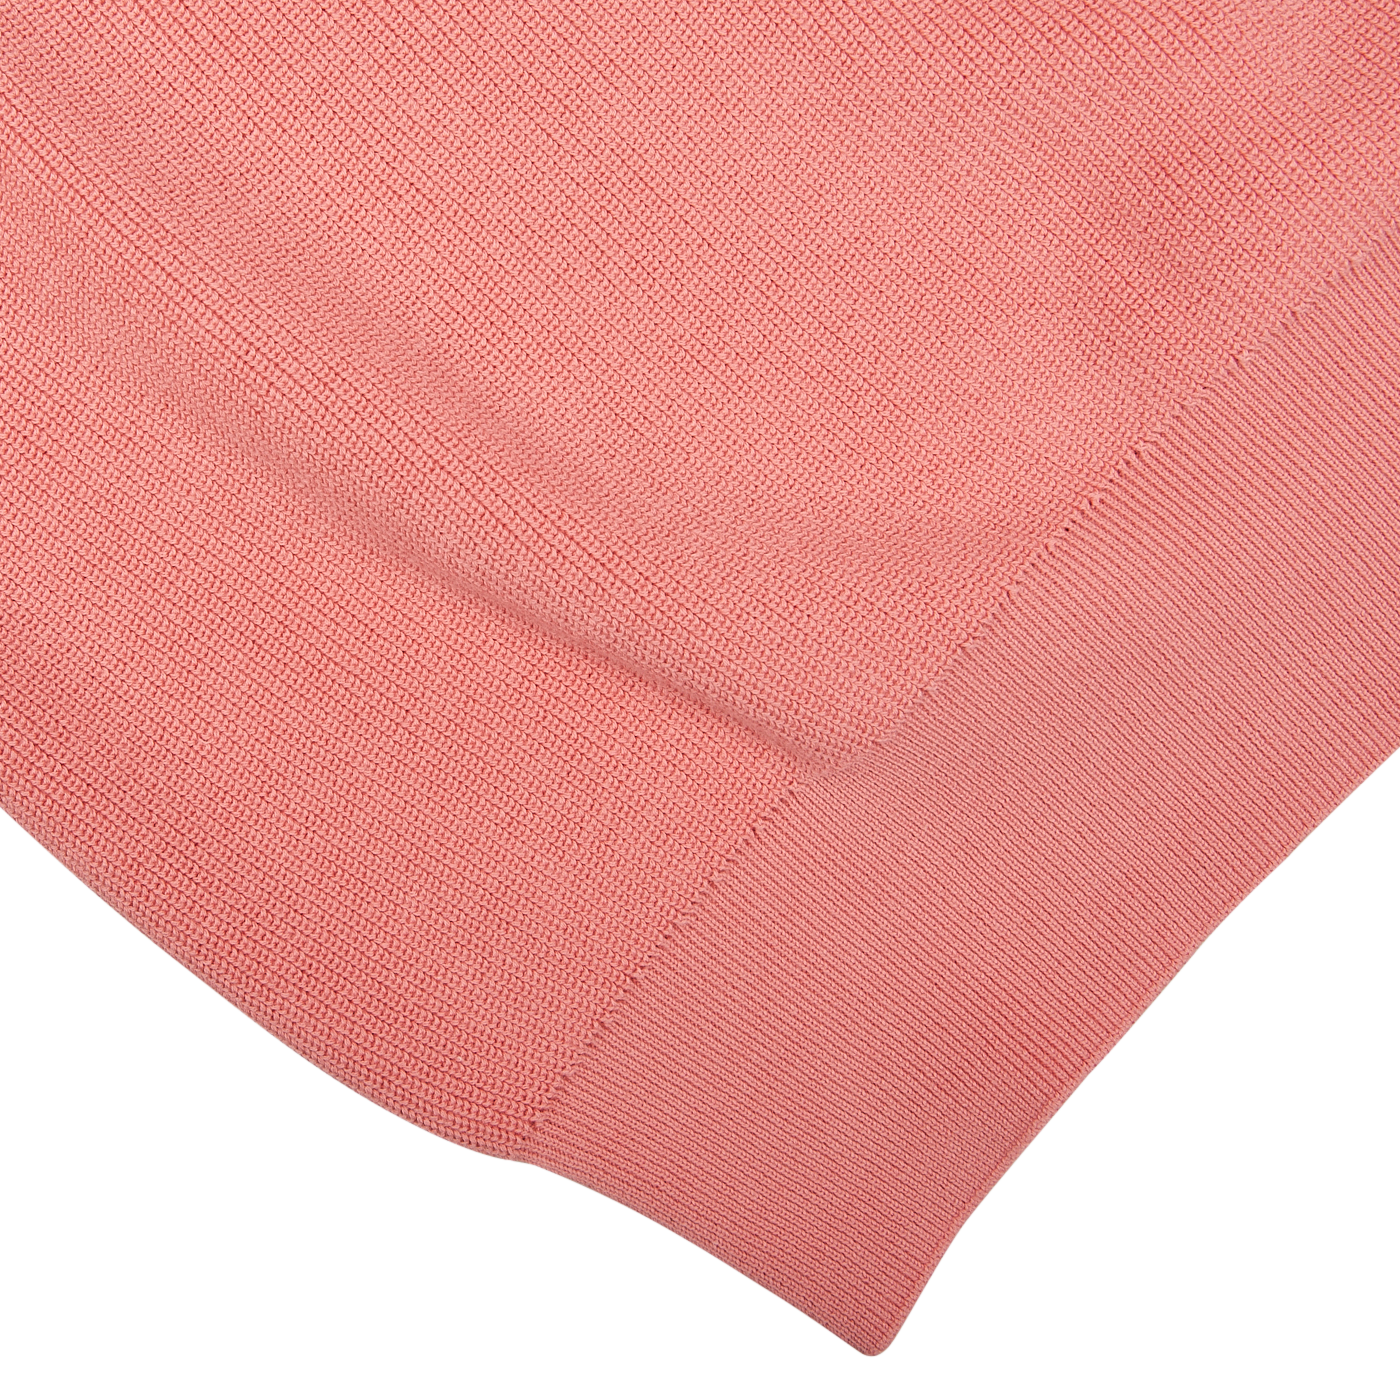 A close up of a coral pink, cotton Aspesi crew neck sweater on a white background.